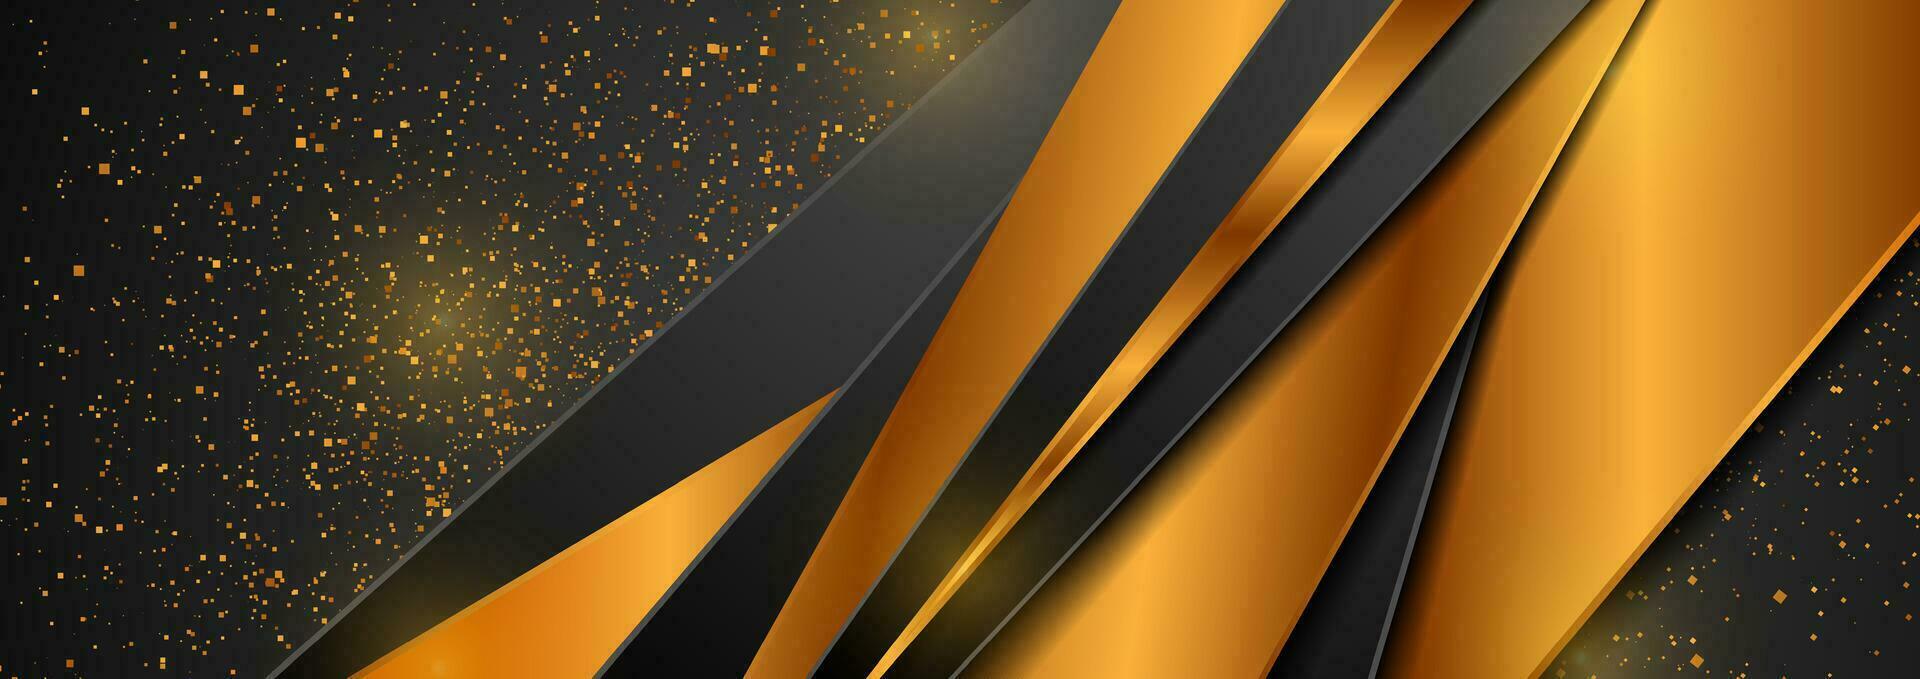 Bronze and black abstract background with glitter dust vector